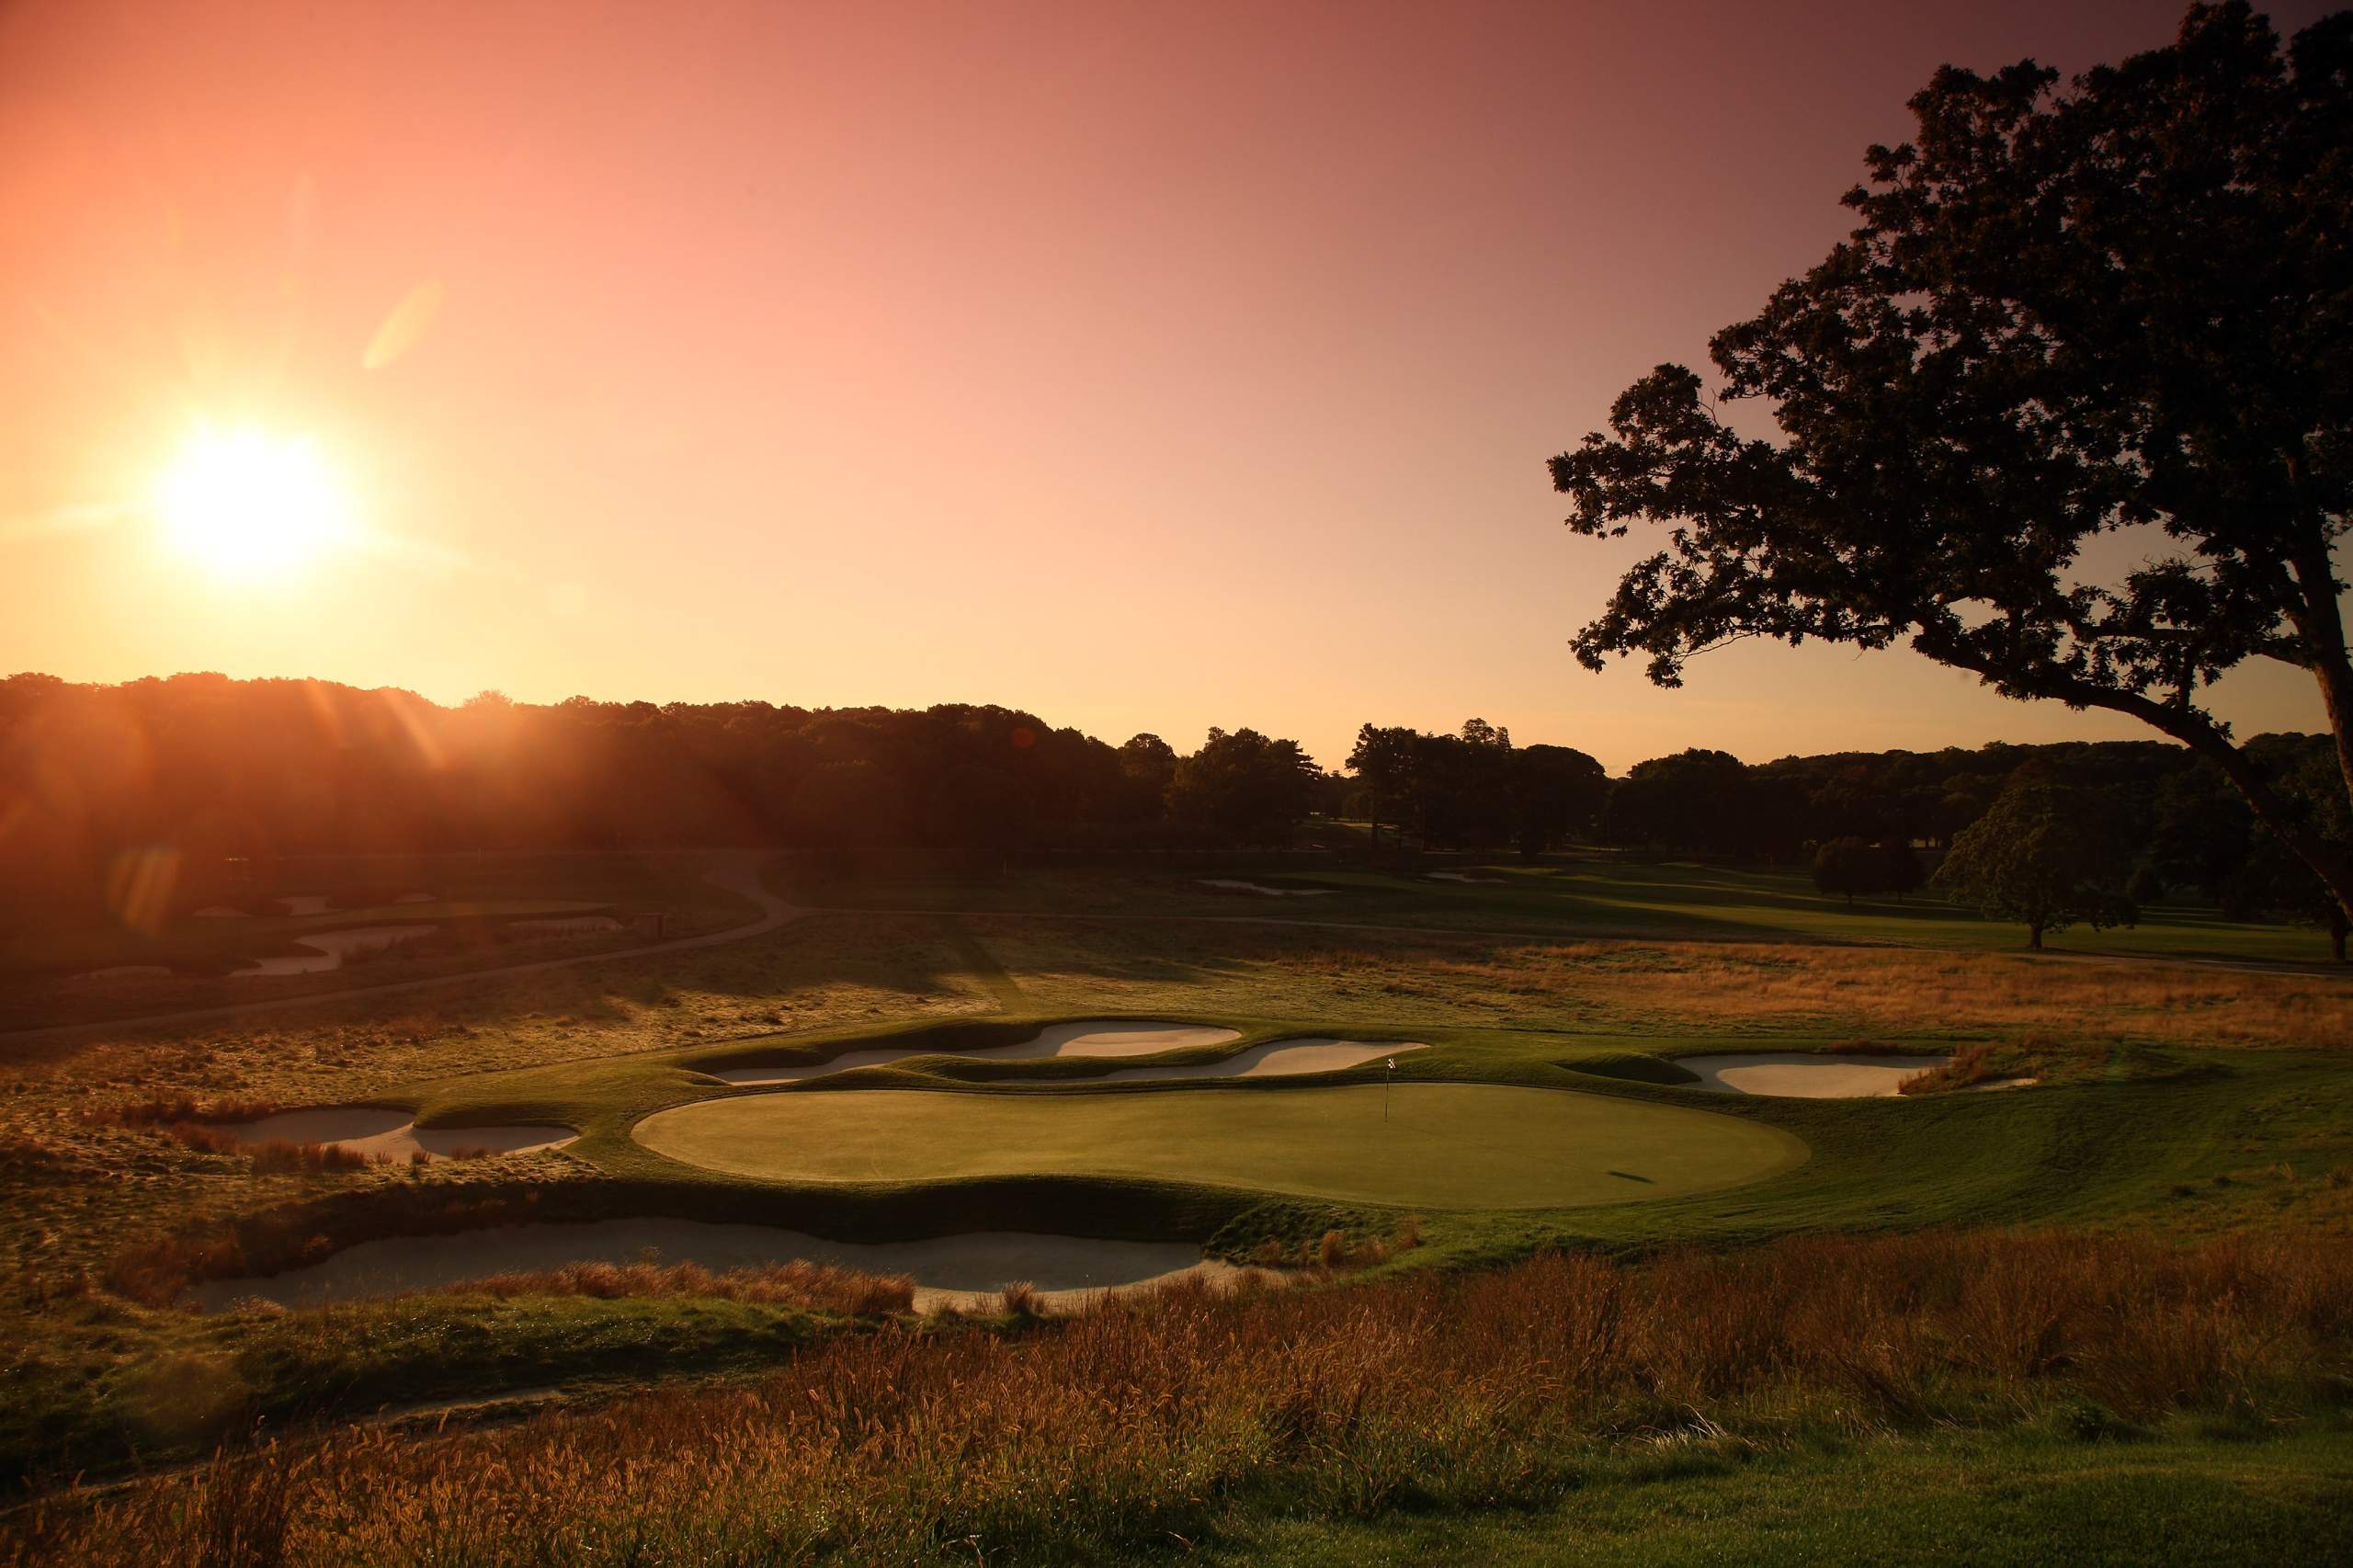 <em><b>Course Location: Farmingdale, New York</b></em> Imagine walking up to the 1st tee of a course for the first time and seeing a sign that reads, "Only for highly skilled golfers.” For many, seeing those words would be an instant invitation to turn around before you lose all the balls in your bag. But at The Black, golfers brace themselves for one of the most exhilarating rounds of their lives. Located in New York, Bethpage Black features uphill par-4s, gigantic bunkers that stump the world's greatest players, and one of the country's most iconic par-5s (4th). The course has played host to the U.S. Open twice (2002, 2009) -- '02 won by Tiger Woods -- and recently hosted the PGA Championship in 2019 (with Brooks Koepka coming out on top). If you aren't a New York resident, playing a round will cost you $150.